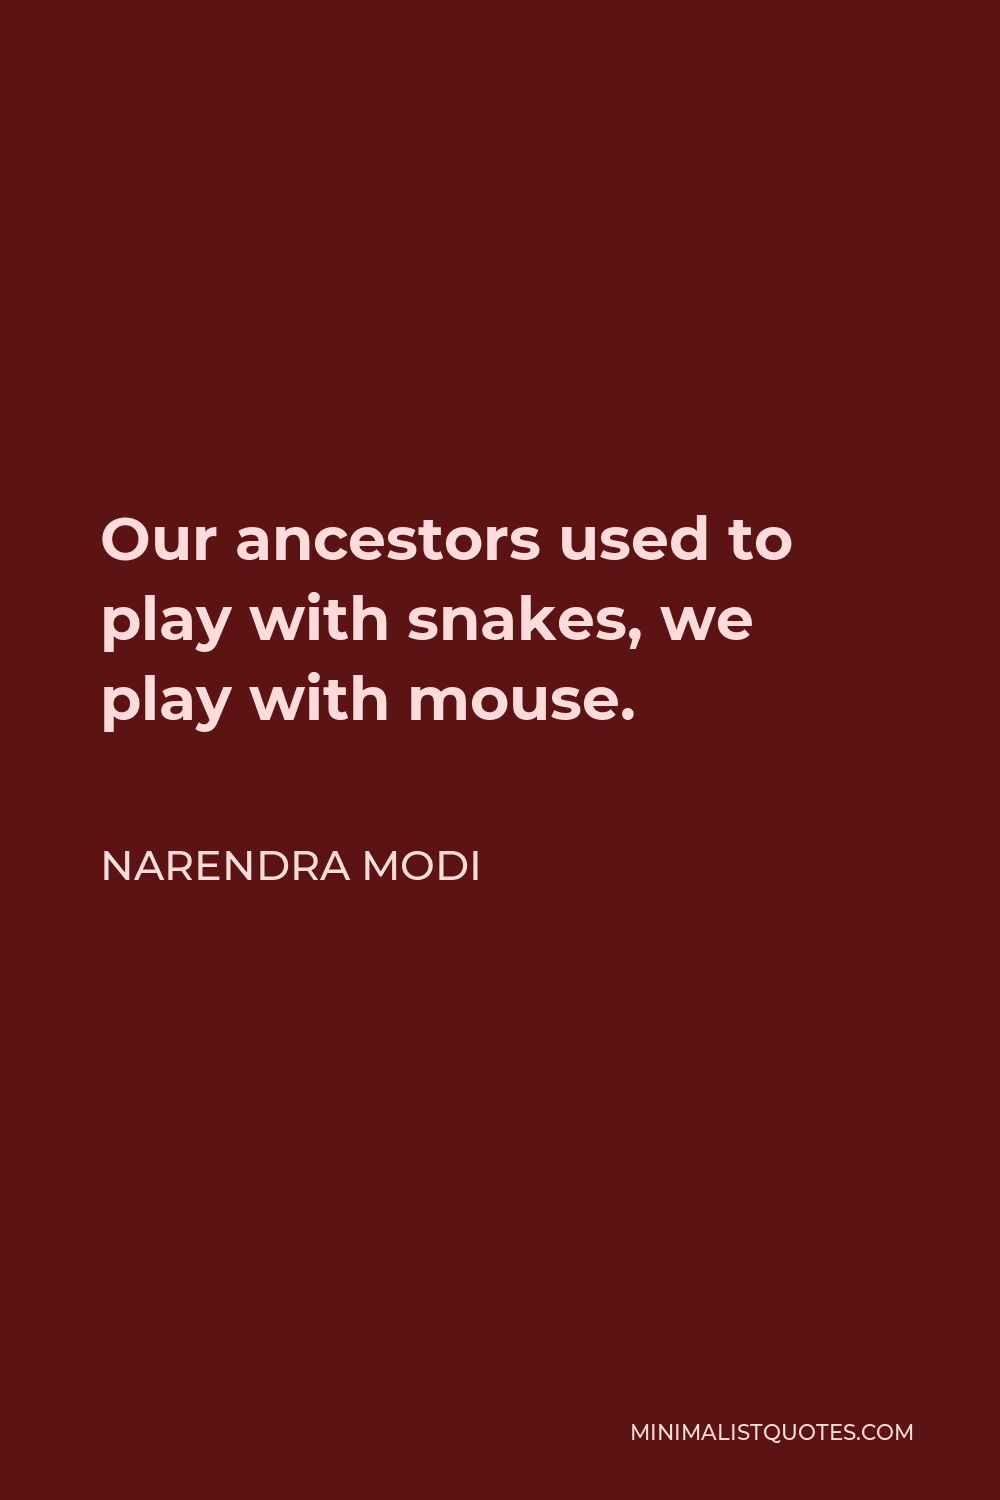 Narendra Modi Quote - Our ancestors used to play with snakes, we play with mouse.